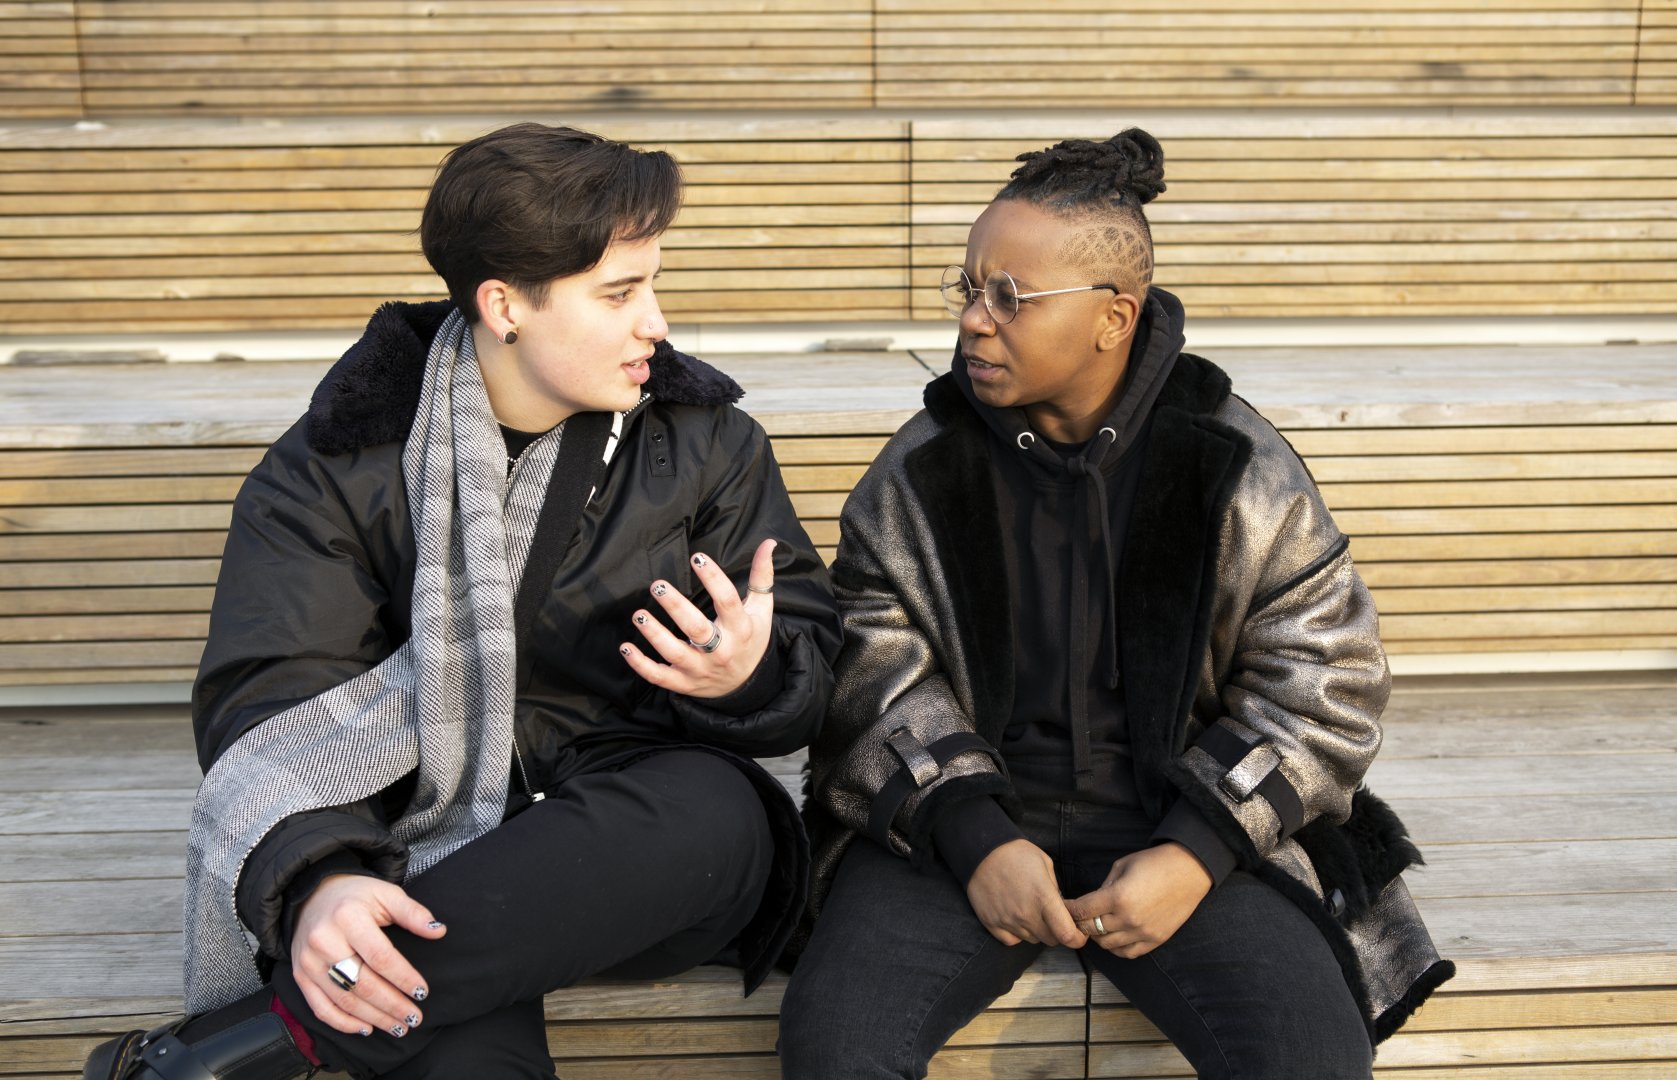 Two transmasculine people sitting together and having a serious conversation.  Photo by Zackary Drucker; The Gender Spectrum Collection